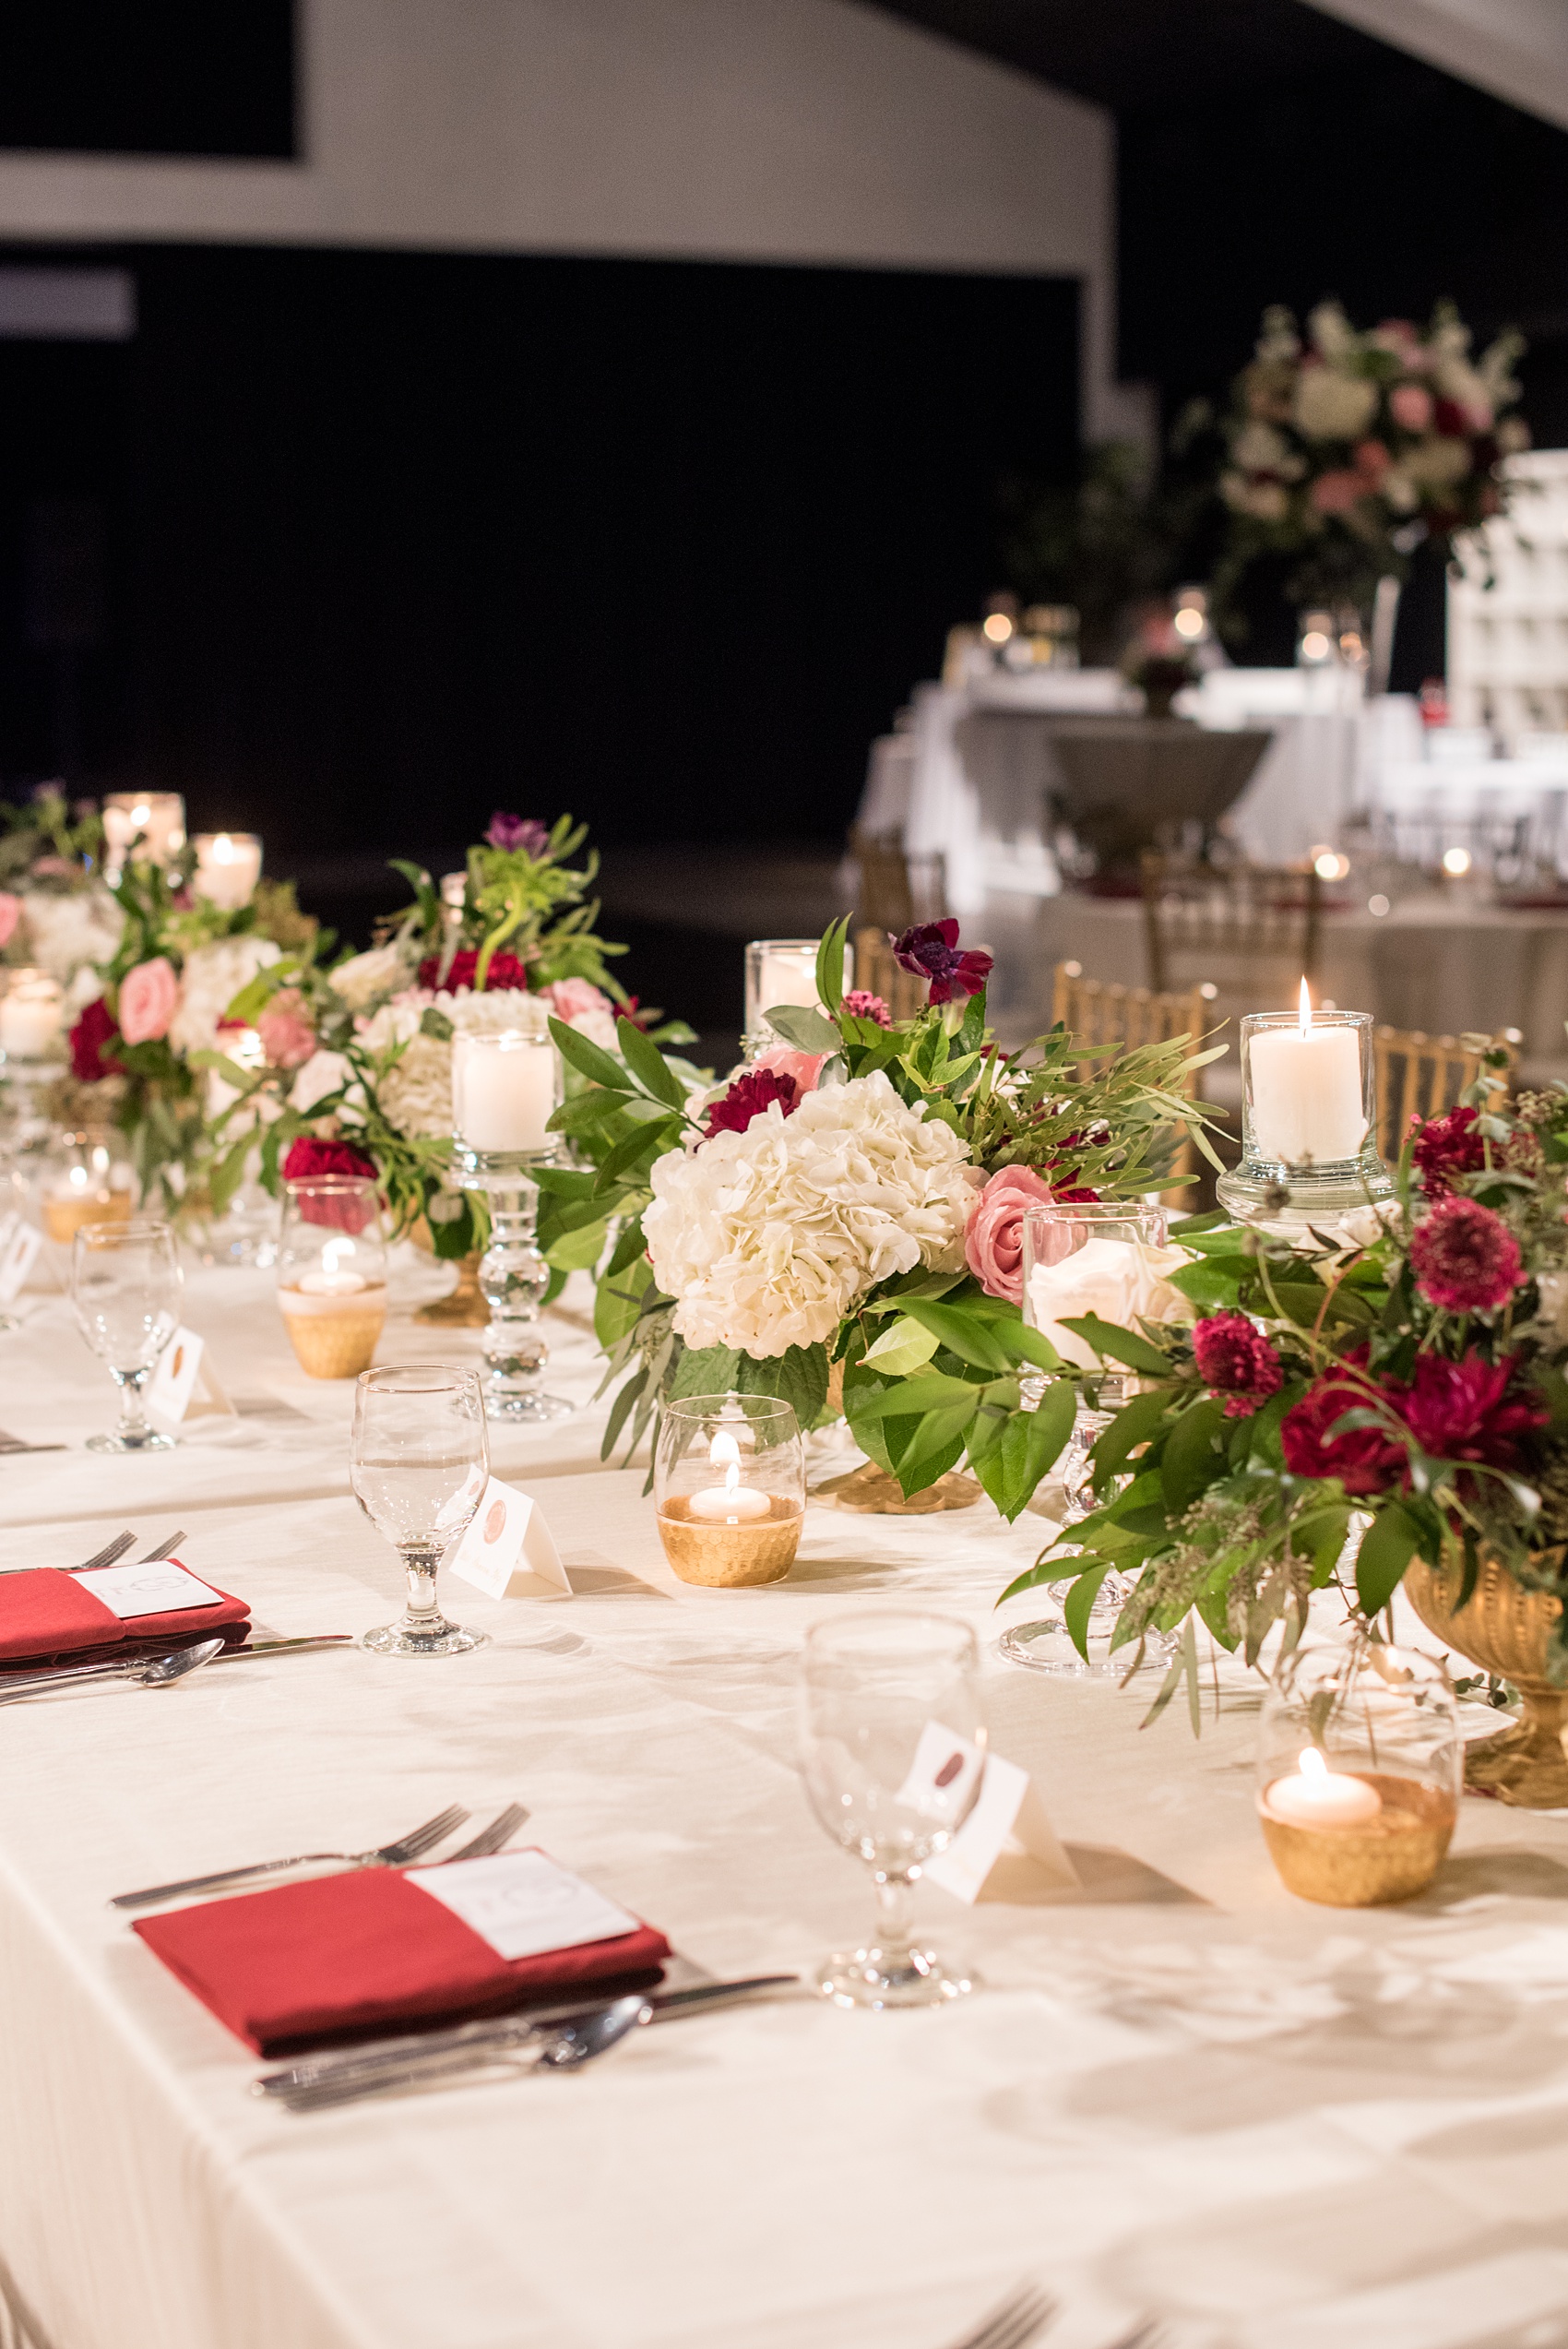 A fall wedding with burgundy, dusty rose and grey details. The reception room was filled with high + low floral centerpieces, with red and pink details, + lots of candlelight. Marble tiles served as table numbers. Mikkel Paige Photography, photographer in Greenville NC and Raleigh, captured this wedding at Rock Springs Center, planned by @vivalevent. Click through for more details and pictures from their day! #mikkelpaige #northcarolinawedding #southernwedding #weddingreception #burgundywedding